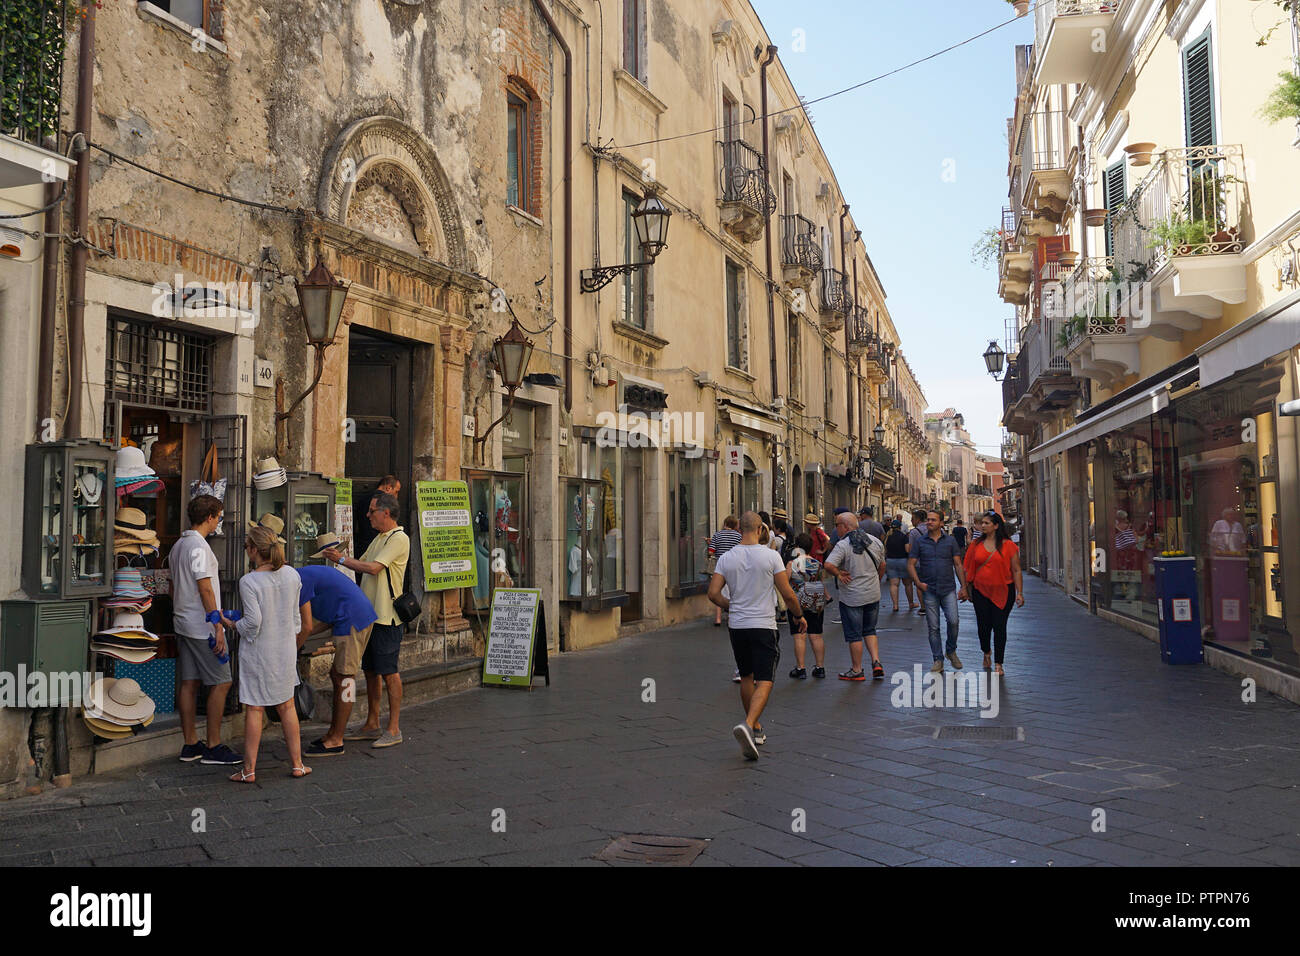 Corso Umberto I, main road and shopping mile of the old town of Taormina, Sicily, Italy Stock Photo